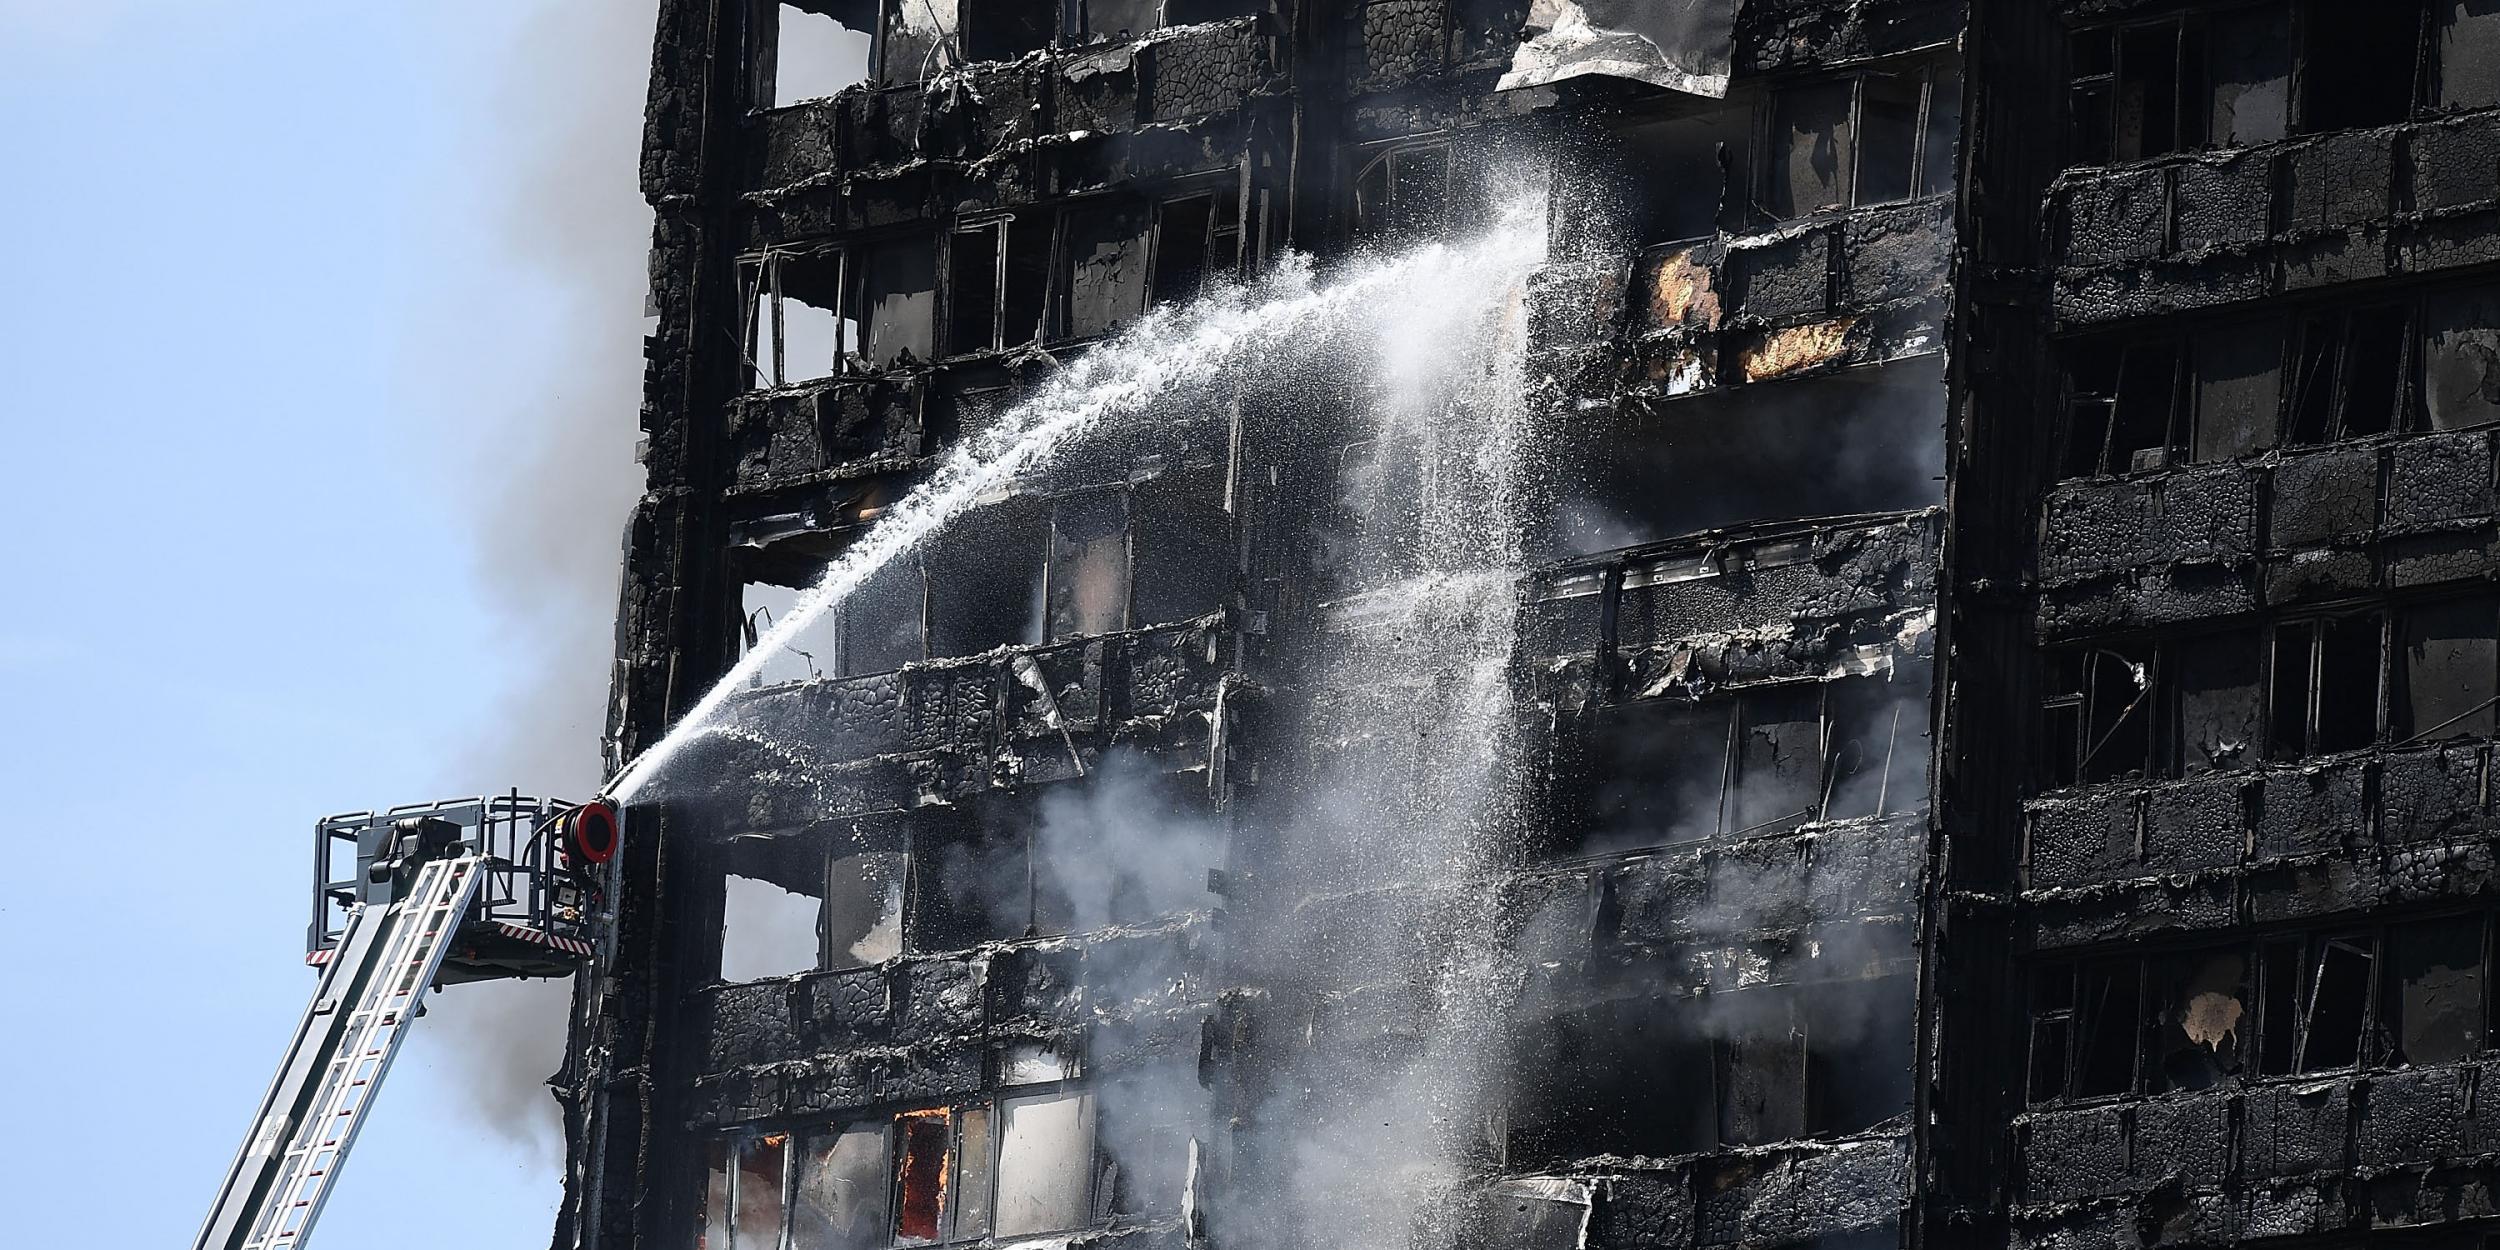 The Grenfell tower fire in June 2017 horrified the nation, but Labour warns it could still happen again